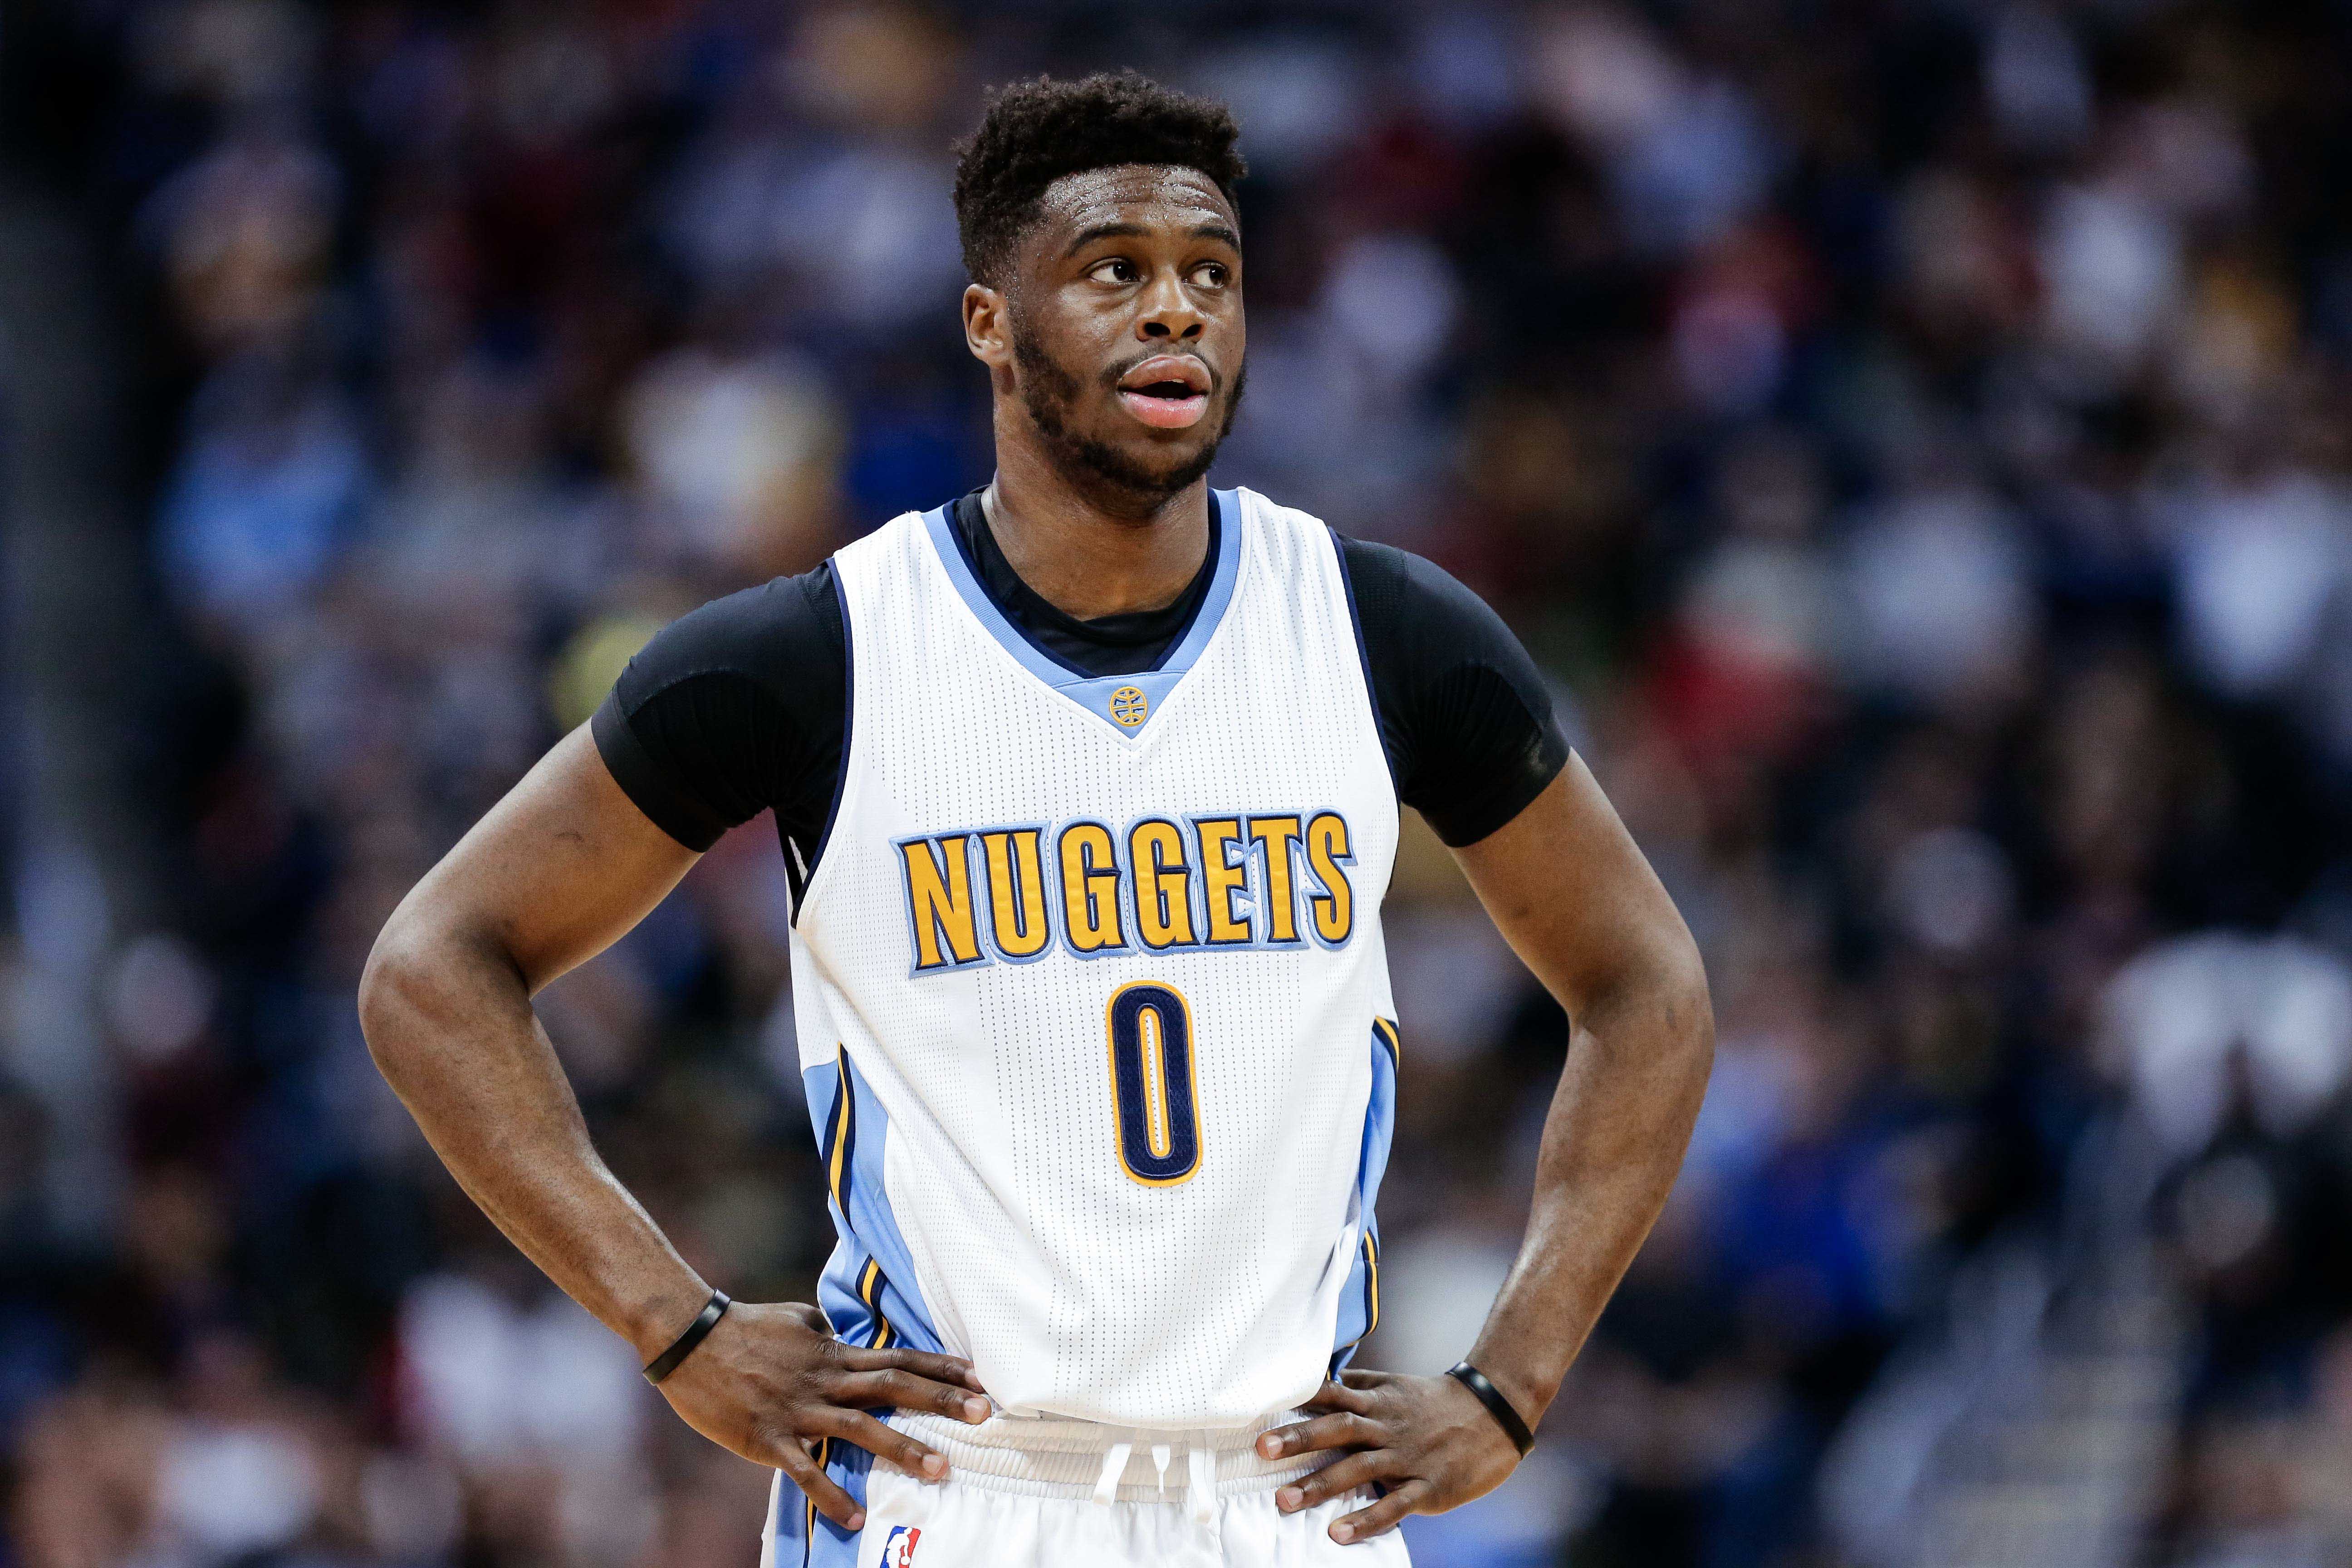 The Nuggets have decisions to make at point guard and shooting